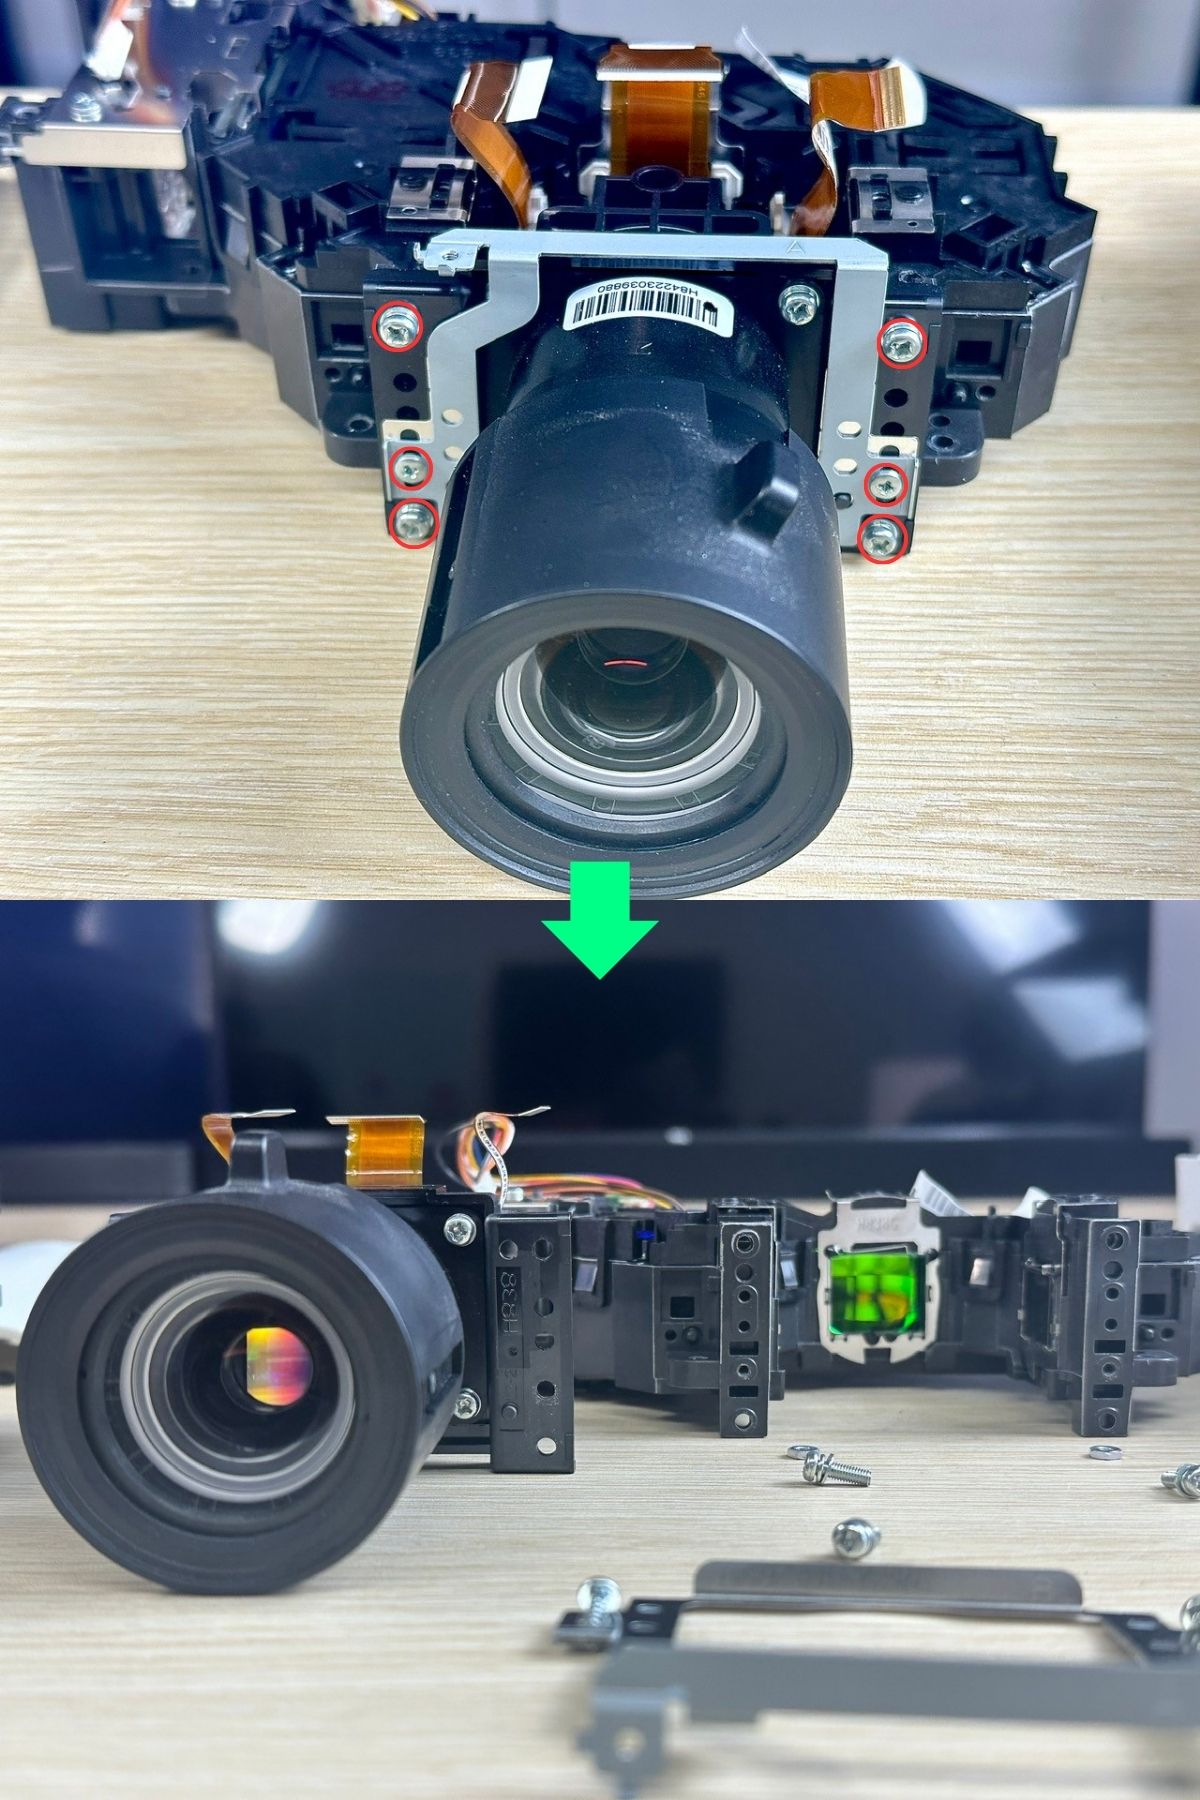 remove the screws that attach the lens & the LCD panels to the black box